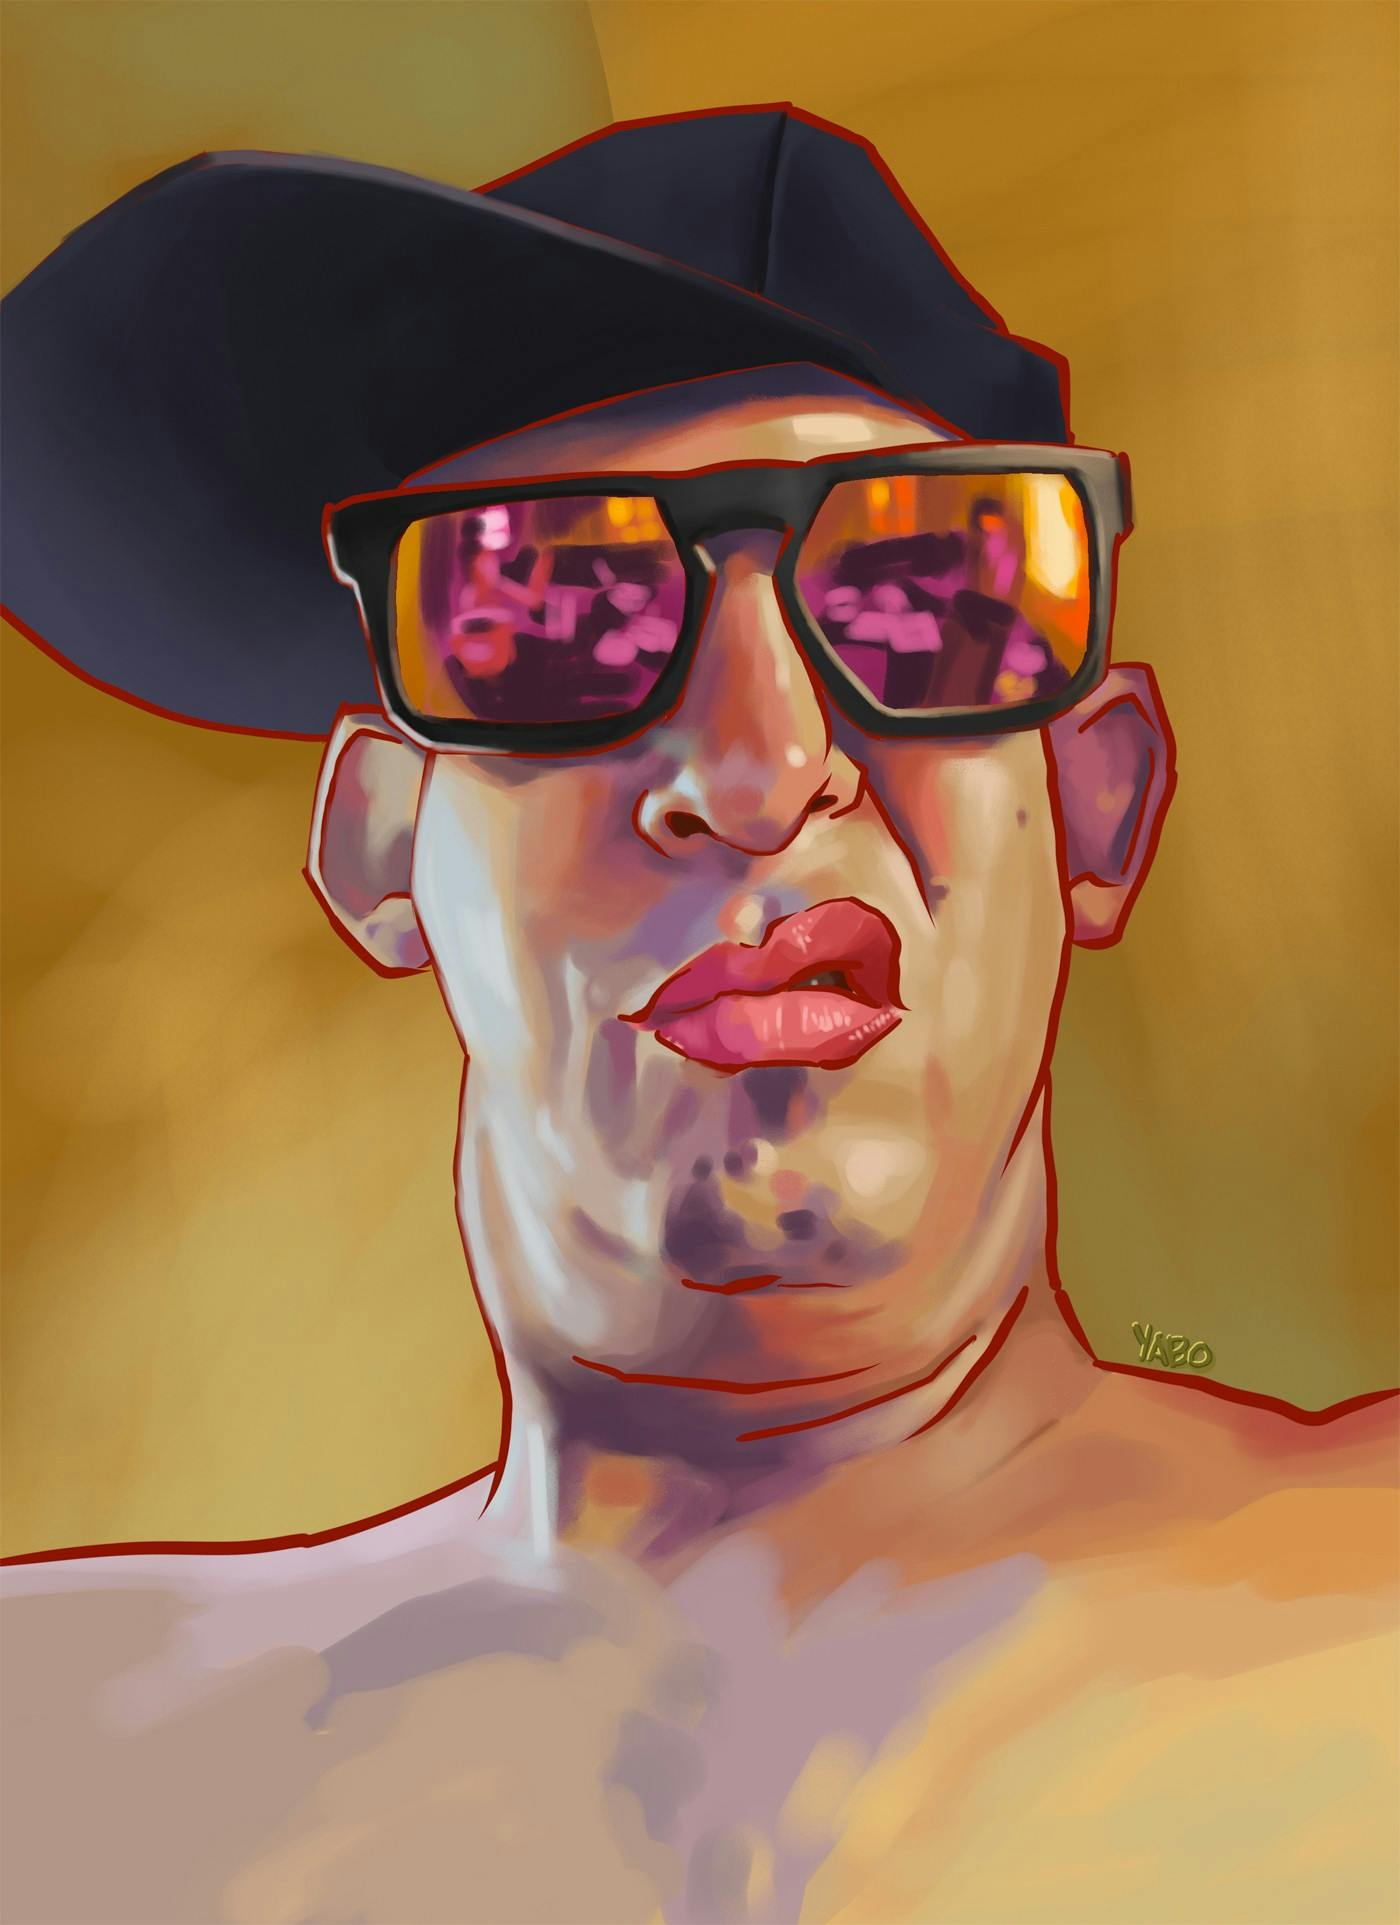 A painterly portrait illustration of a sneering man wearing an off-centre baseball hat and sunglasses.